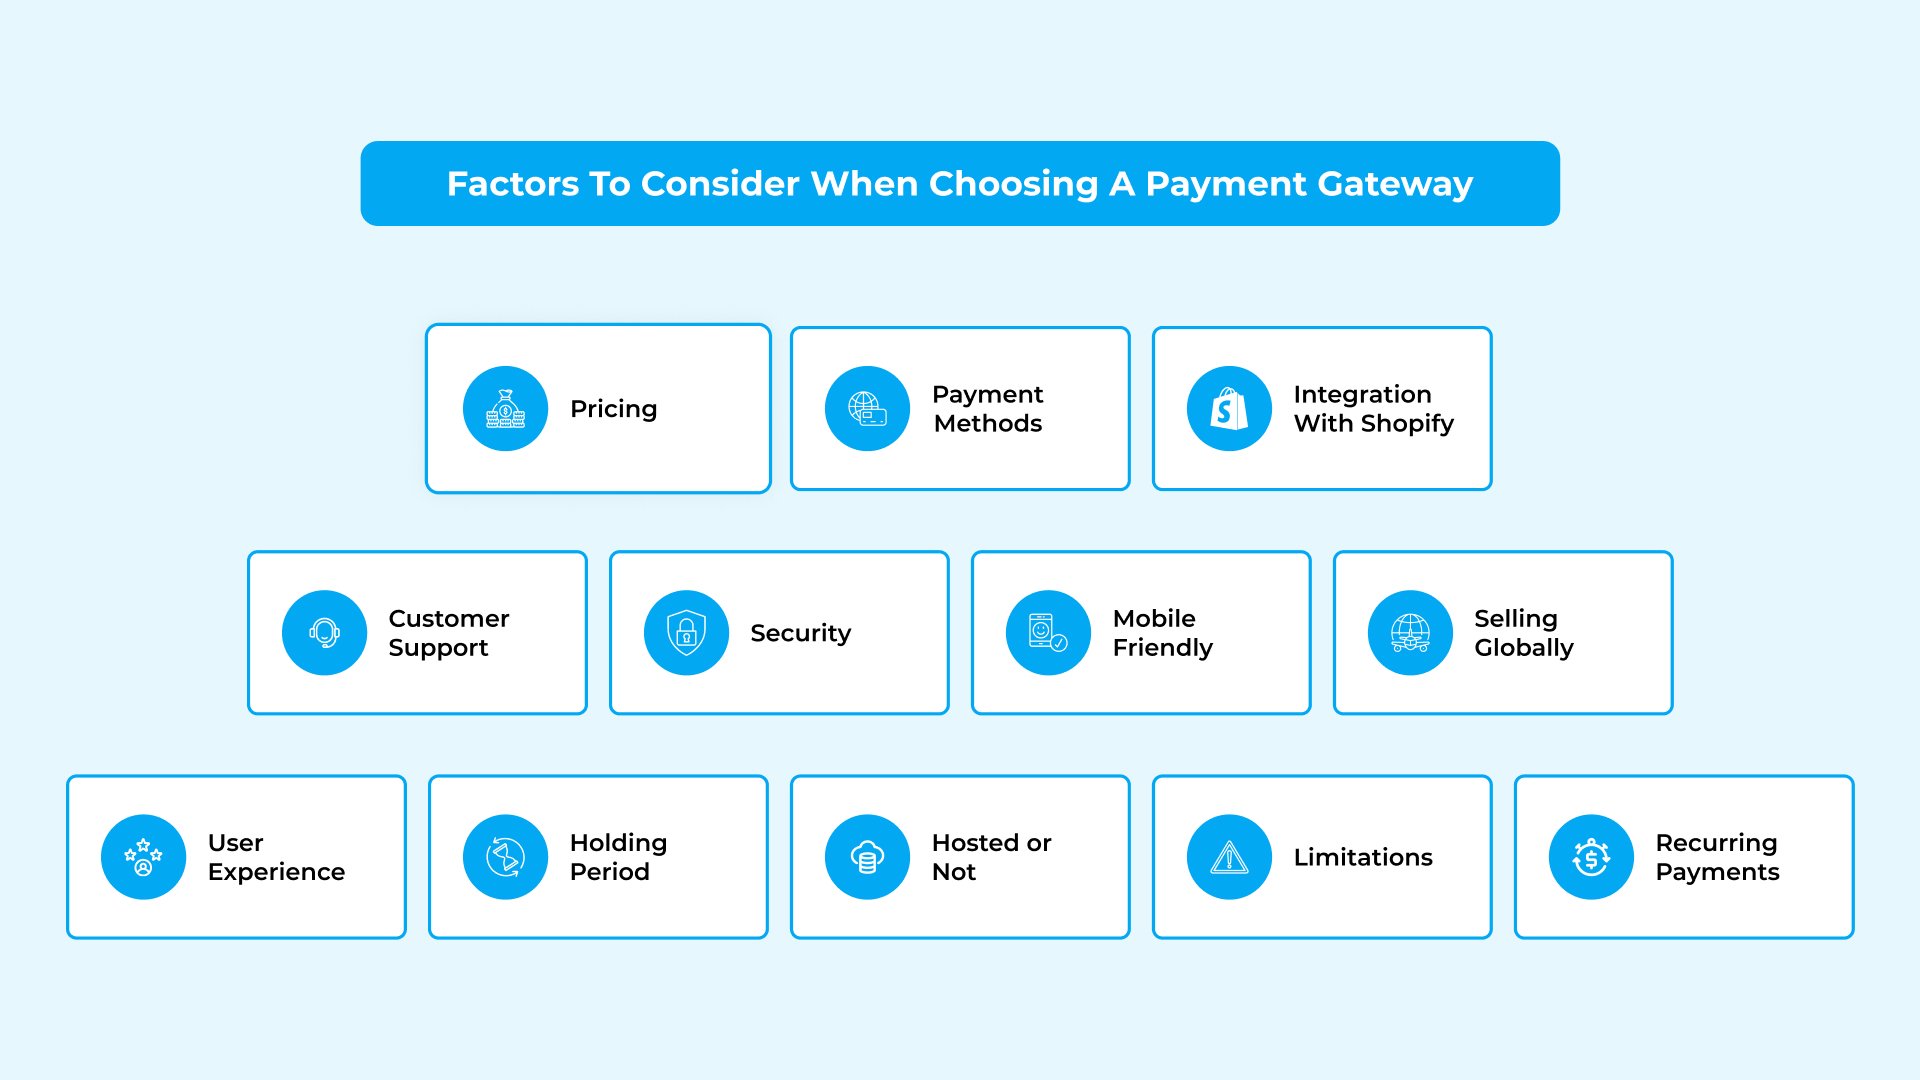 Factors to Consider When Choosing a Payment Gateway